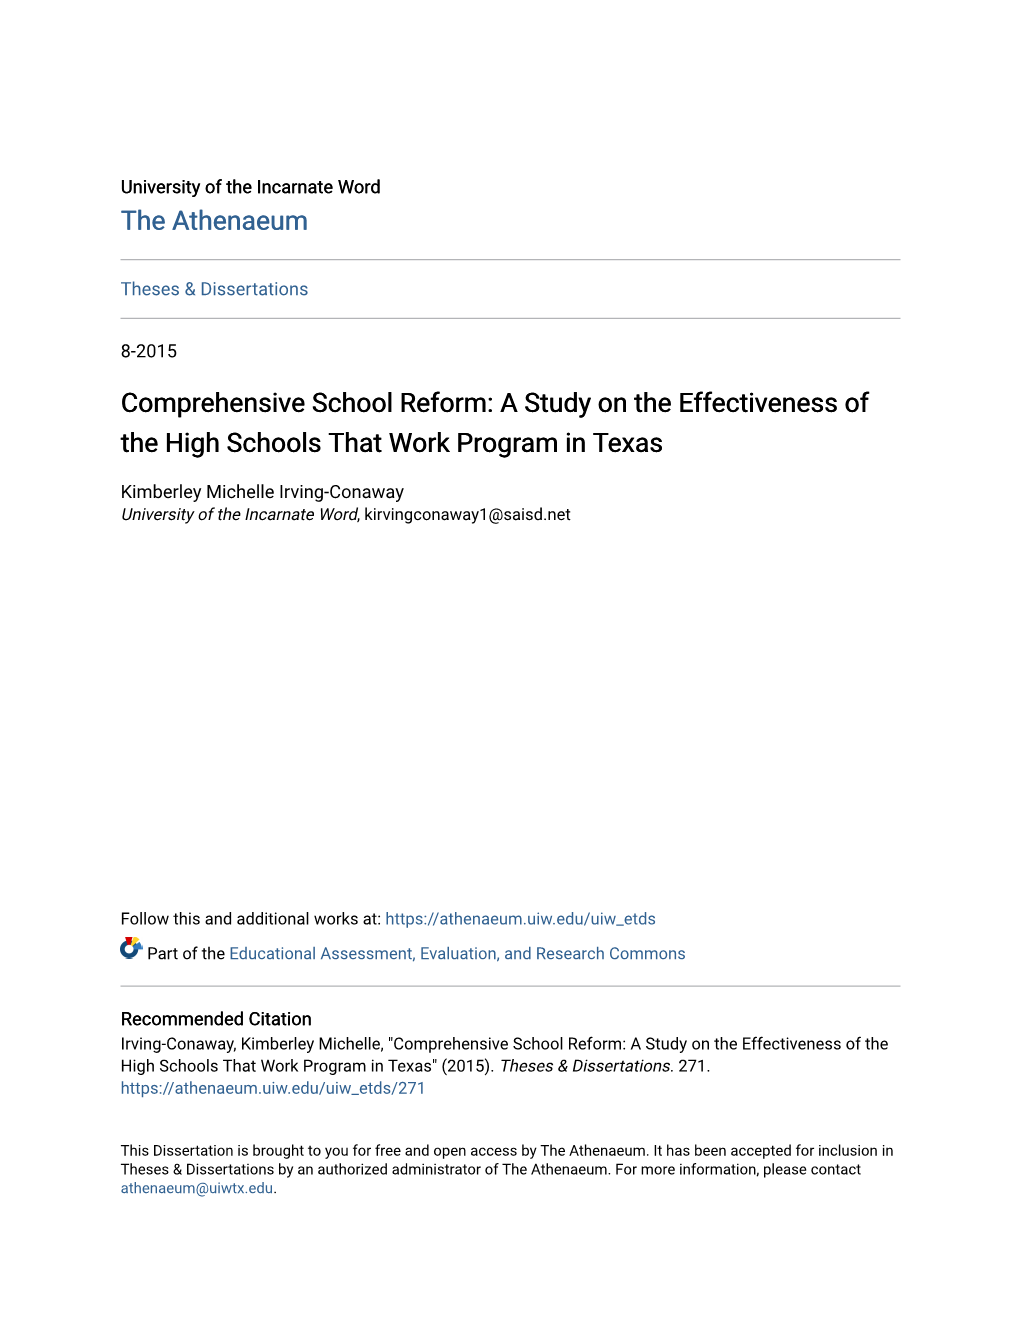 Comprehensive School Reform: a Study on the Effectiveness of the High Schools That Work Program in Texas